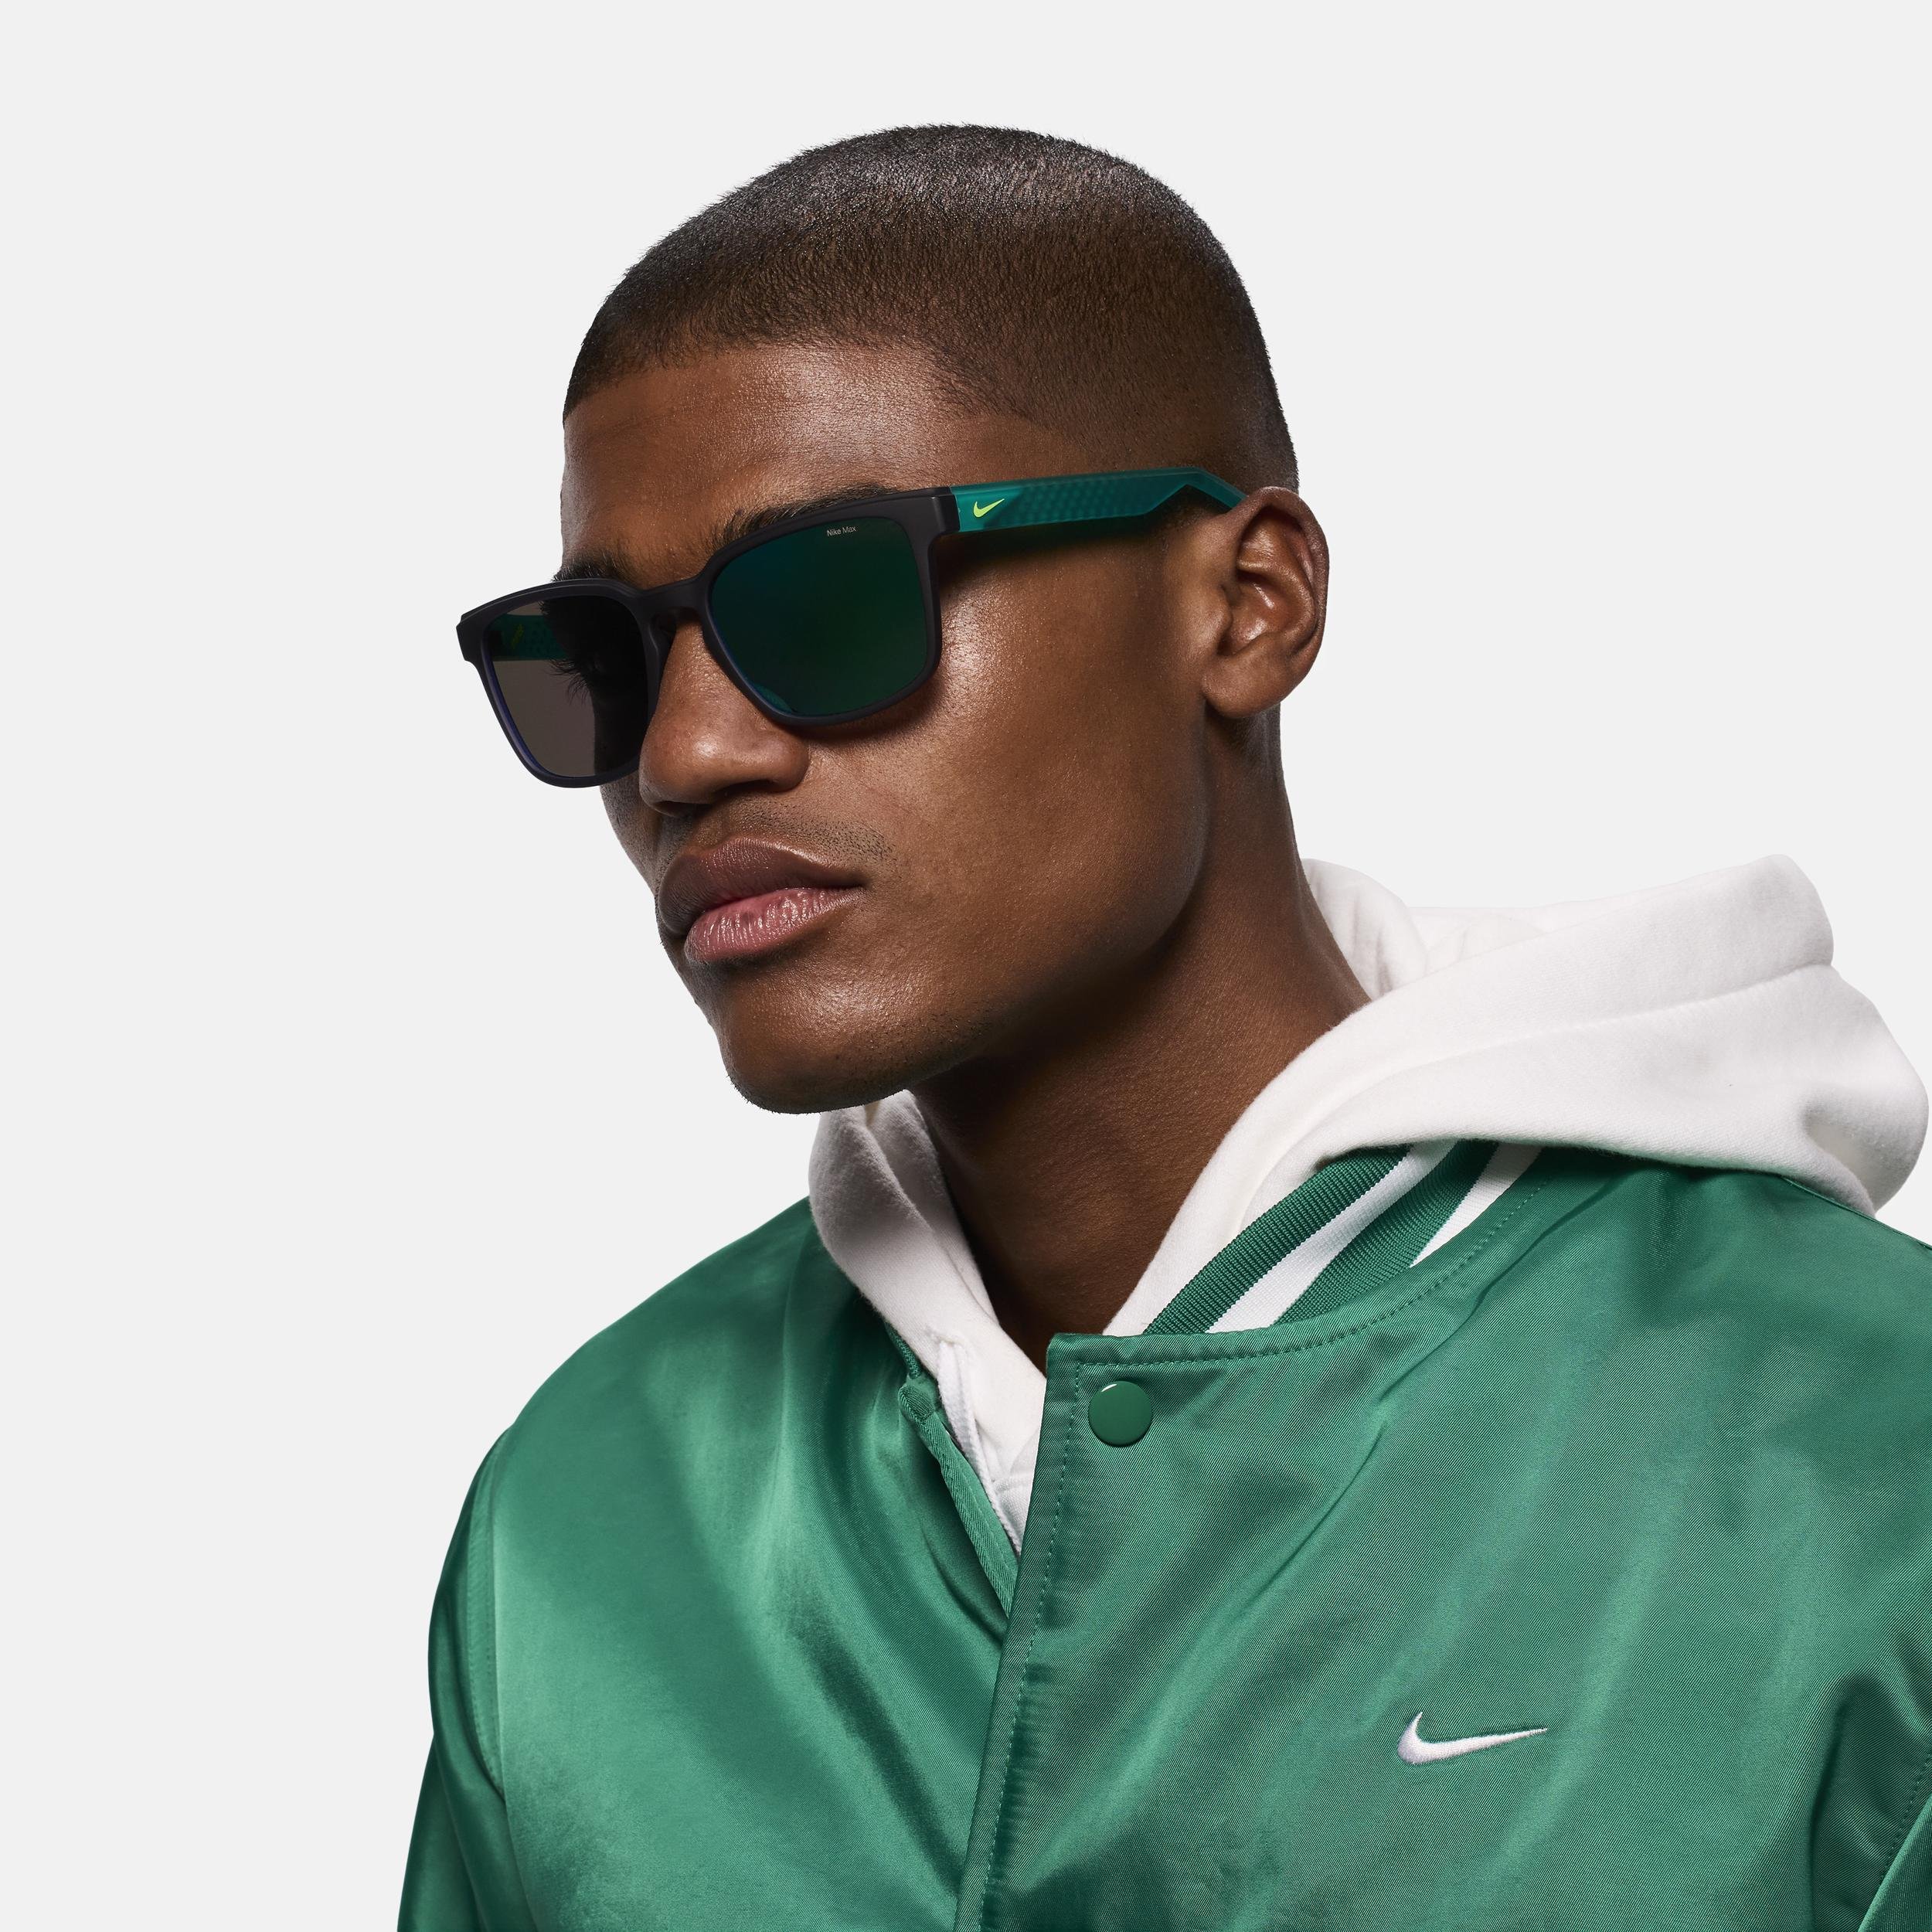 Nike Unisex LiveFree Iconic Mirrored Sunglasses by NIKE